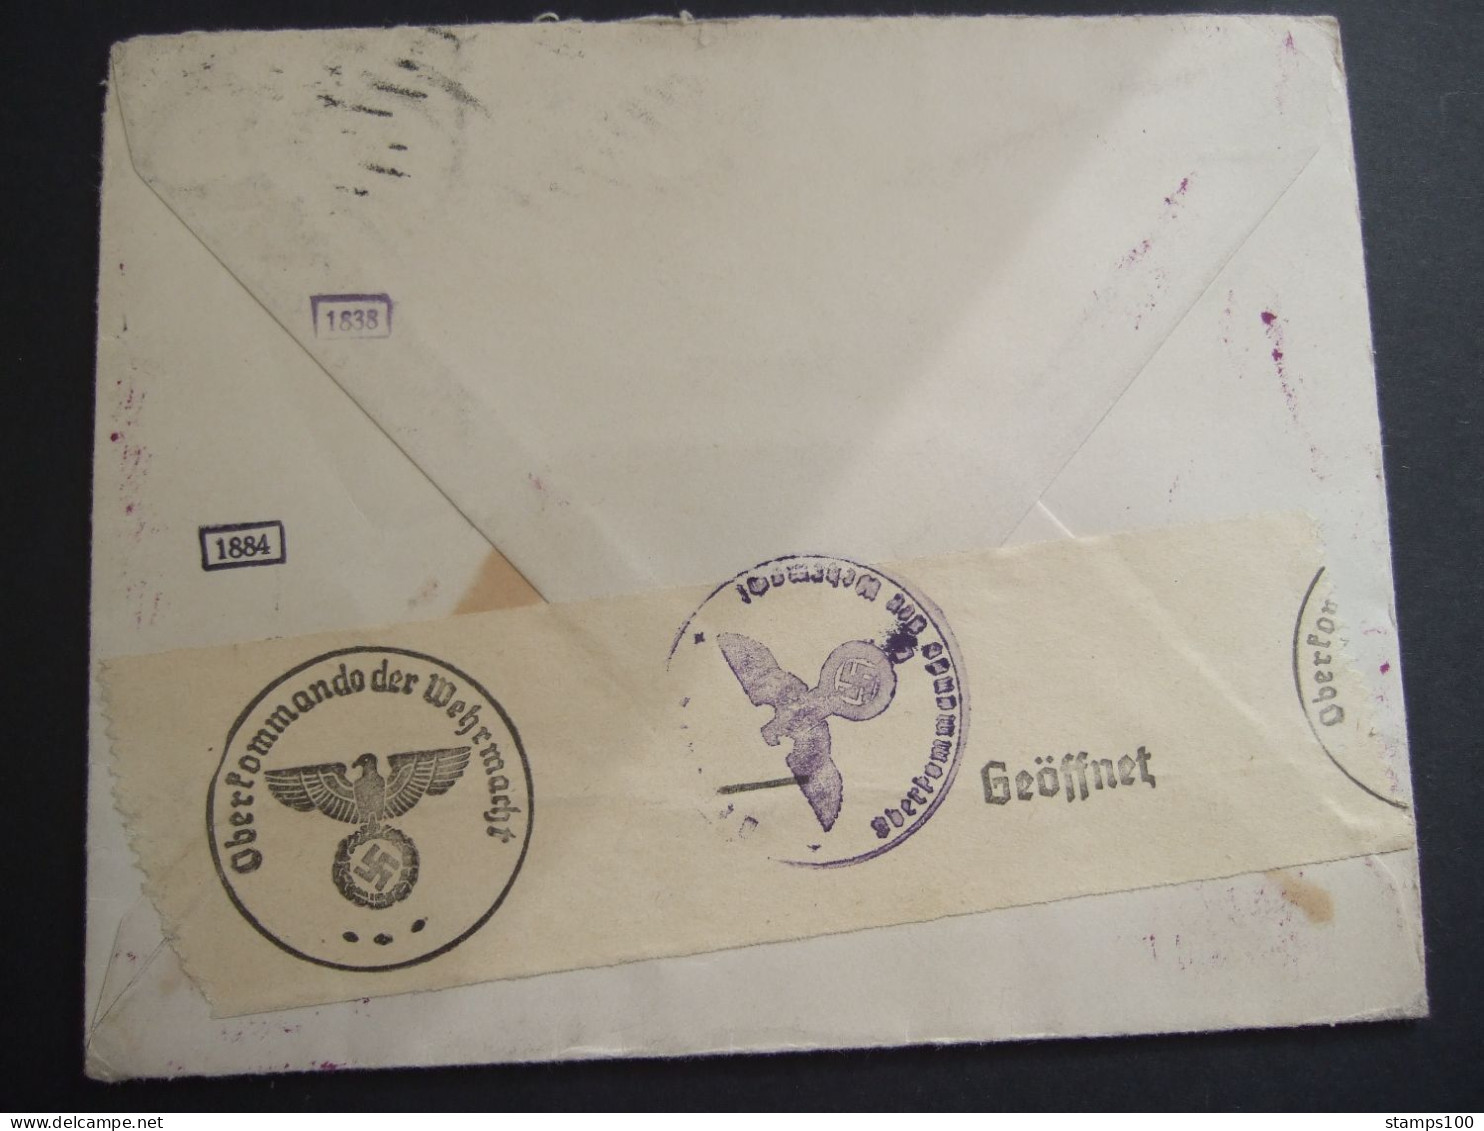 USA BY CLIPPER PLANE FROM RICHMOND TO HESSE NASSAU GERMANY. Letter Opened By OBERCOMMANDO DER WEHRMACHT (P42) - 1c. 1918-1940 Briefe U. Dokumente